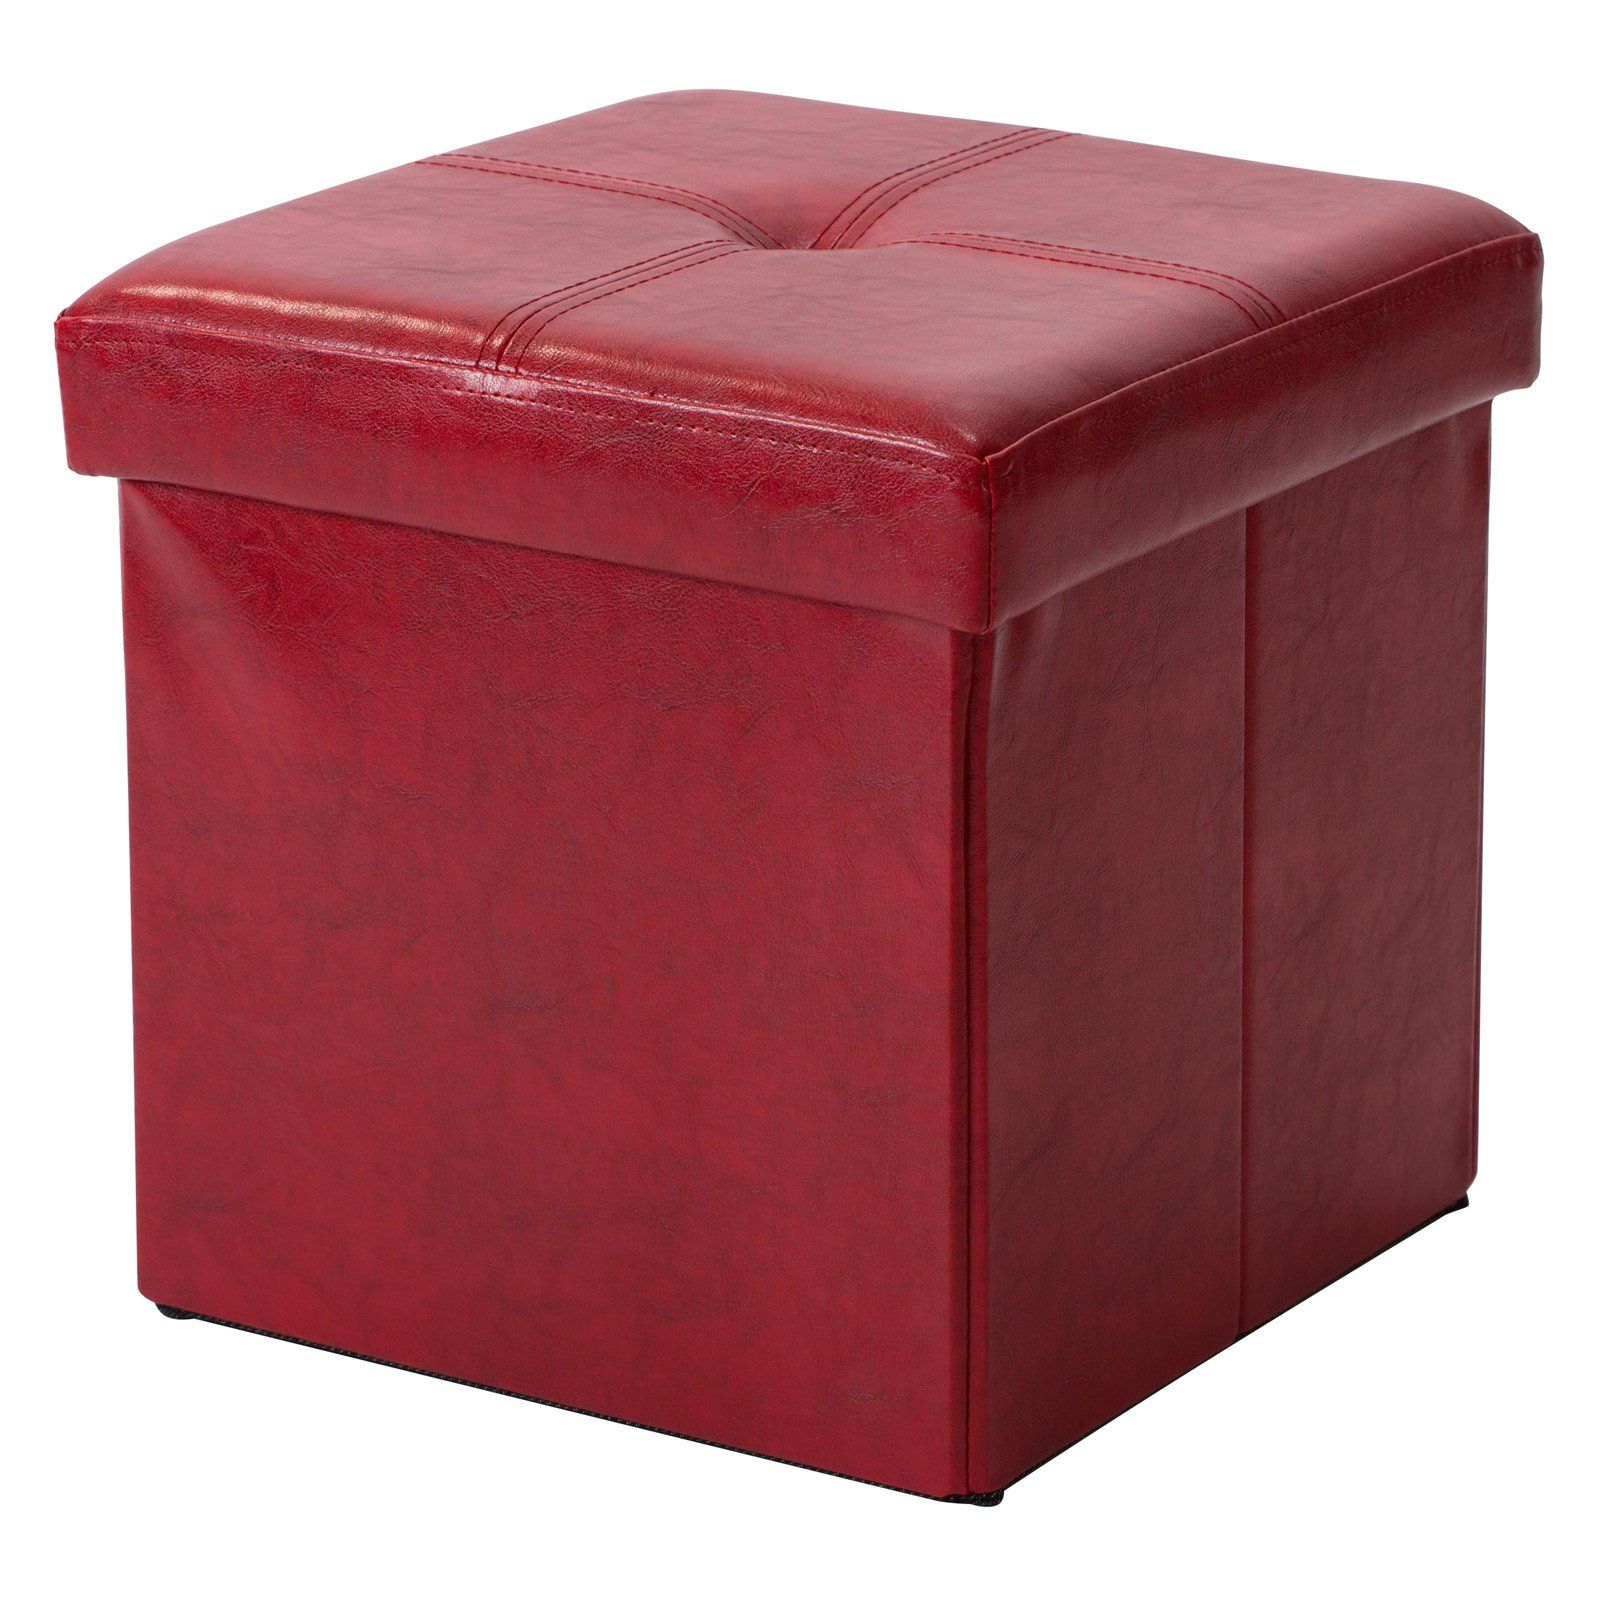 Solid Cuboid Pouf Ottomans With Well Known Simplify Faux Leather Folding Storage Ottoman Cube In Red – Walmart (View 1 of 10)